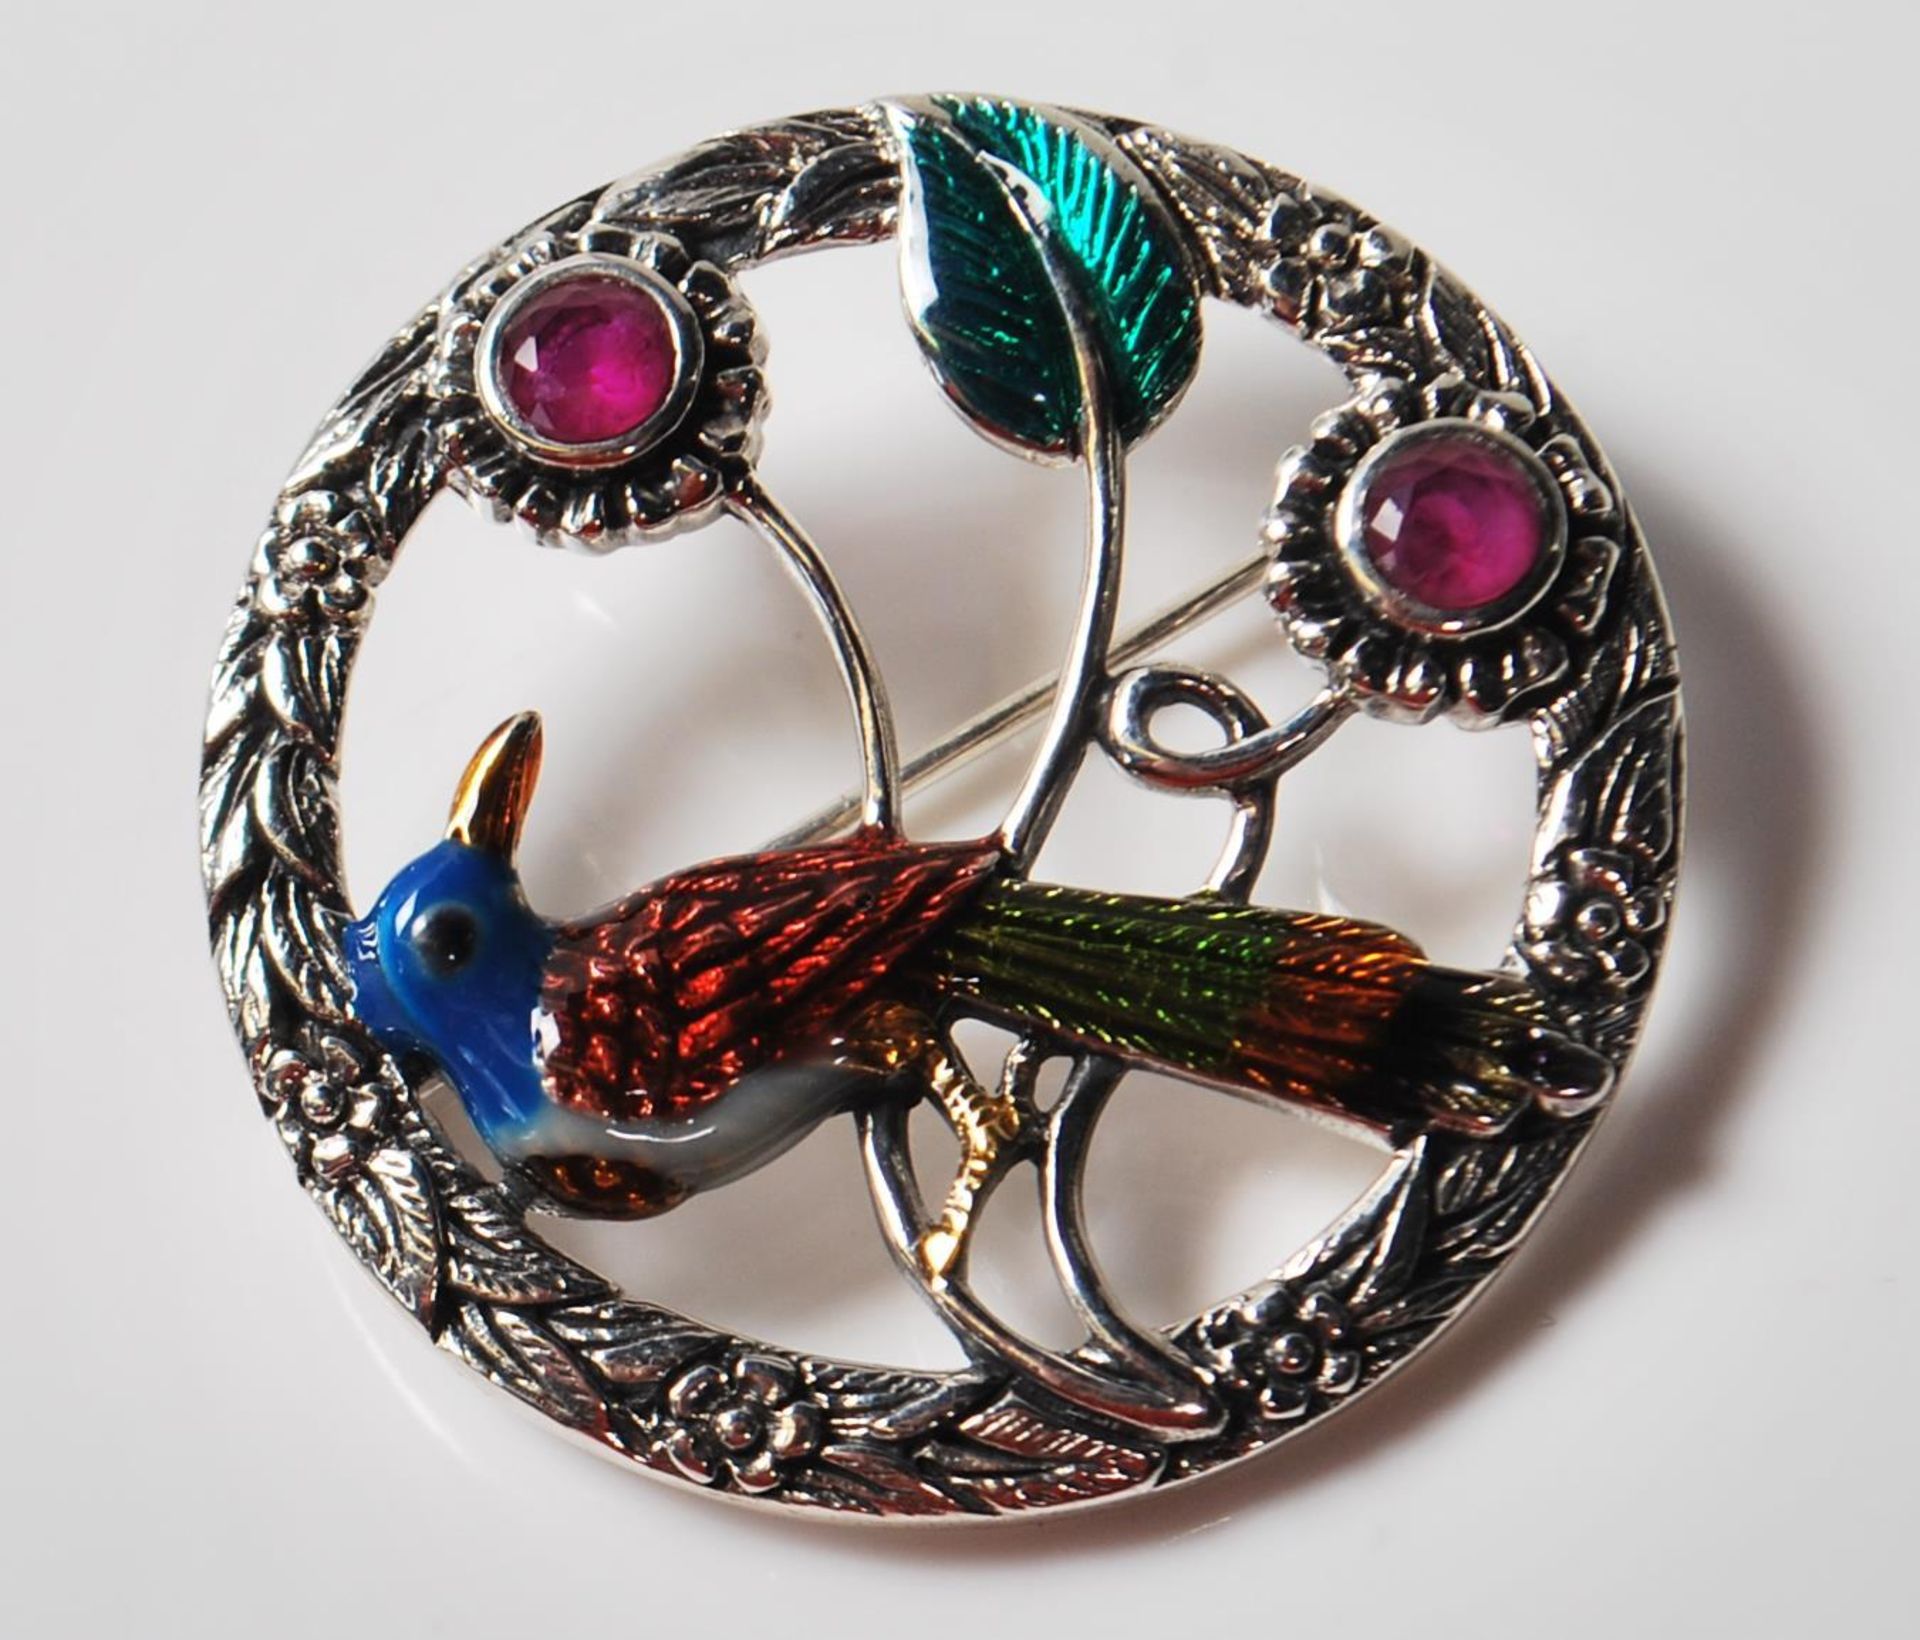 SILVER AND RED STONE BIRD BROOCH - Image 2 of 6